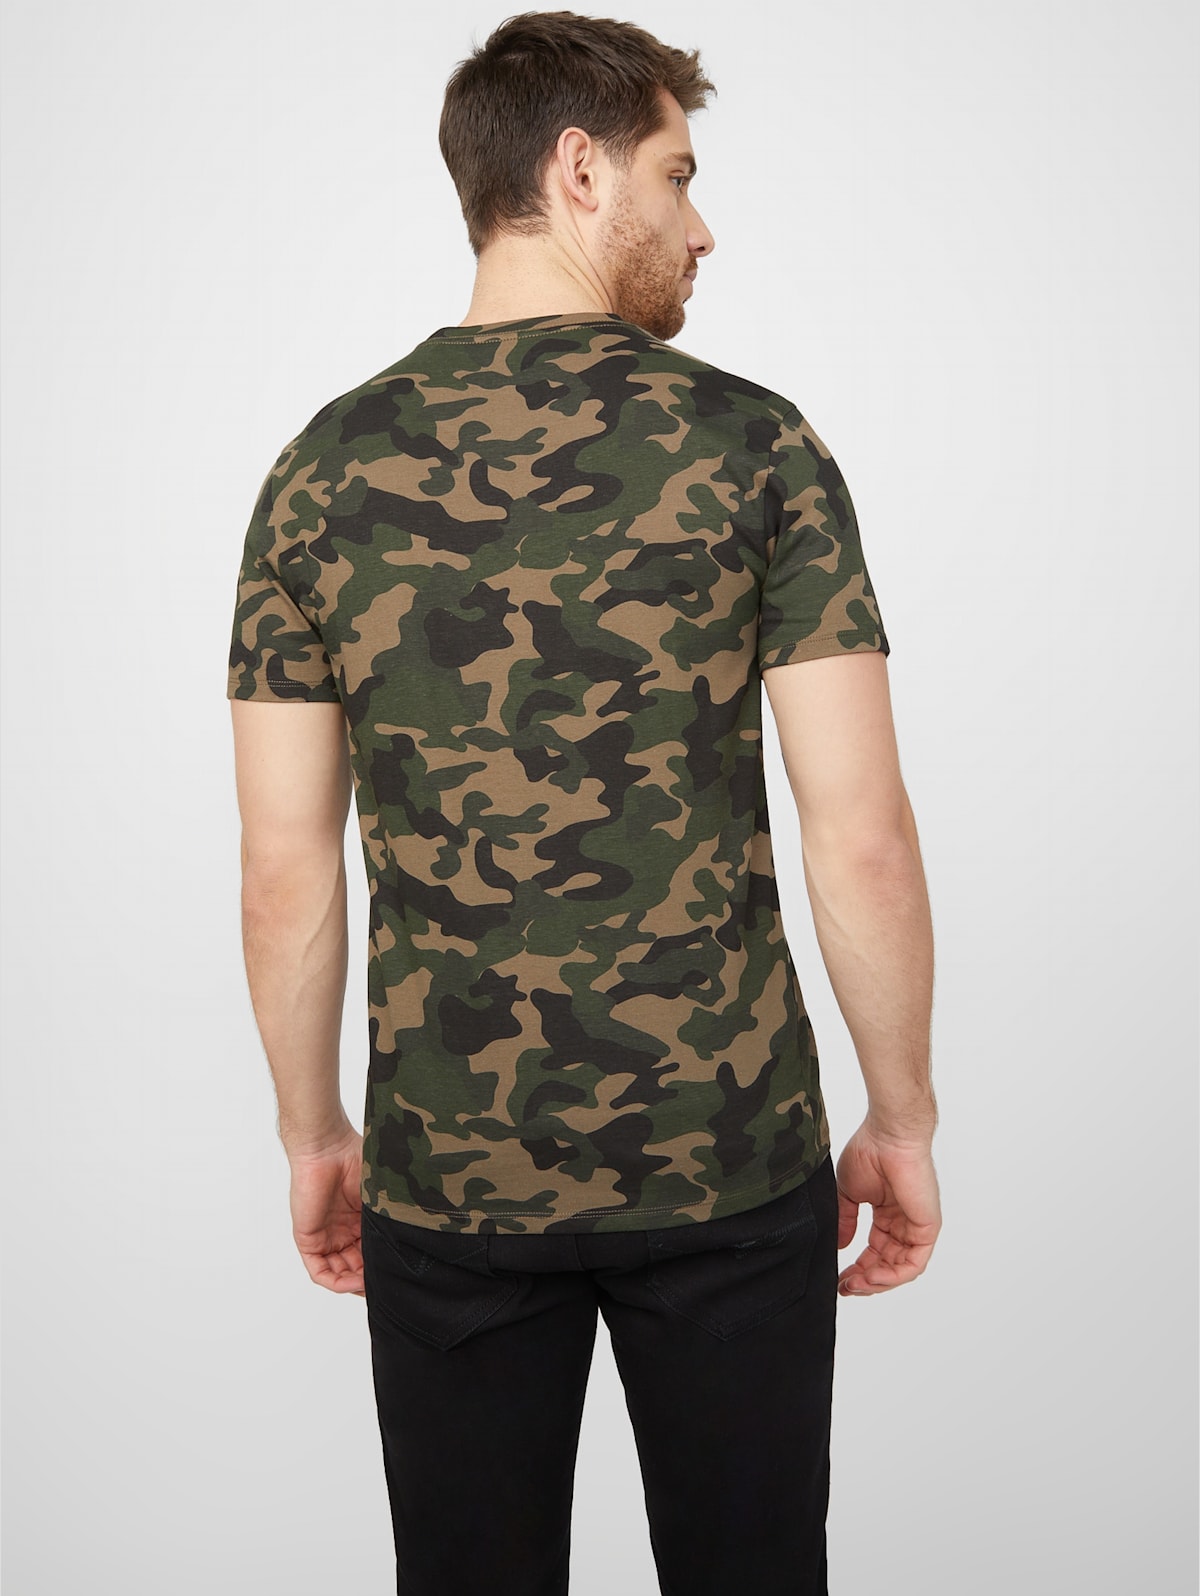 GUESS Factory Cassidy Camo Tee